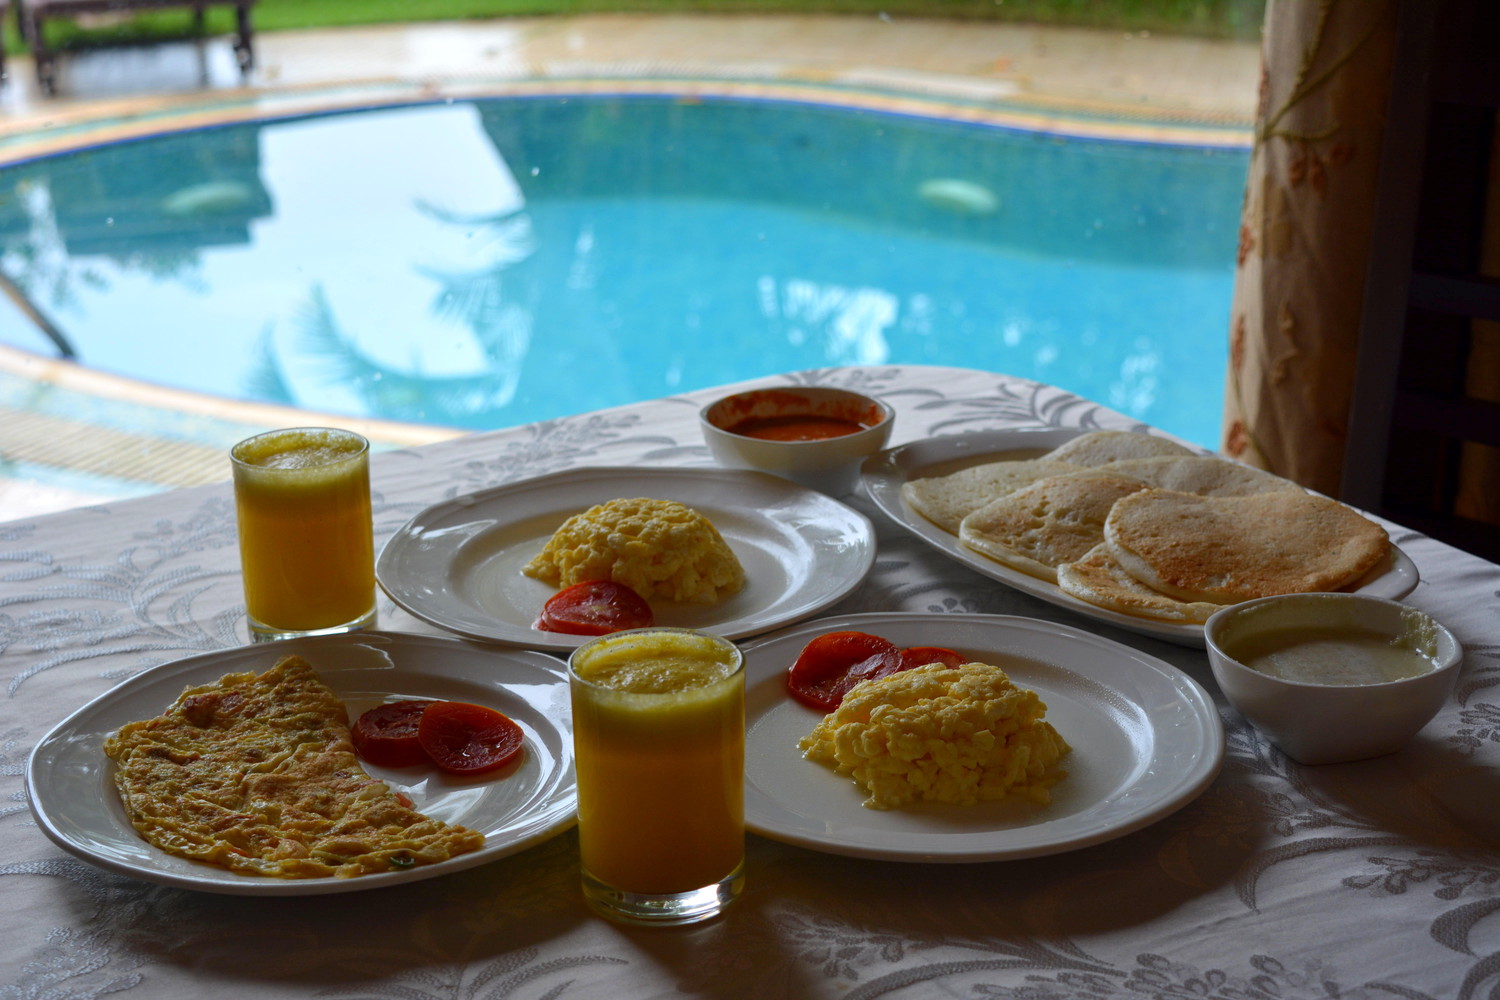 Breakfast laid out on a table with white table cloth beside a swimming pool; there are one plate of omelette served with tomato slices, two plates of scrambled eggs served with tomato slices, a plate of dosas (Southern Indian pancakes), two bowls of chutney (Indian sauce), and two glasses of pineapple juice